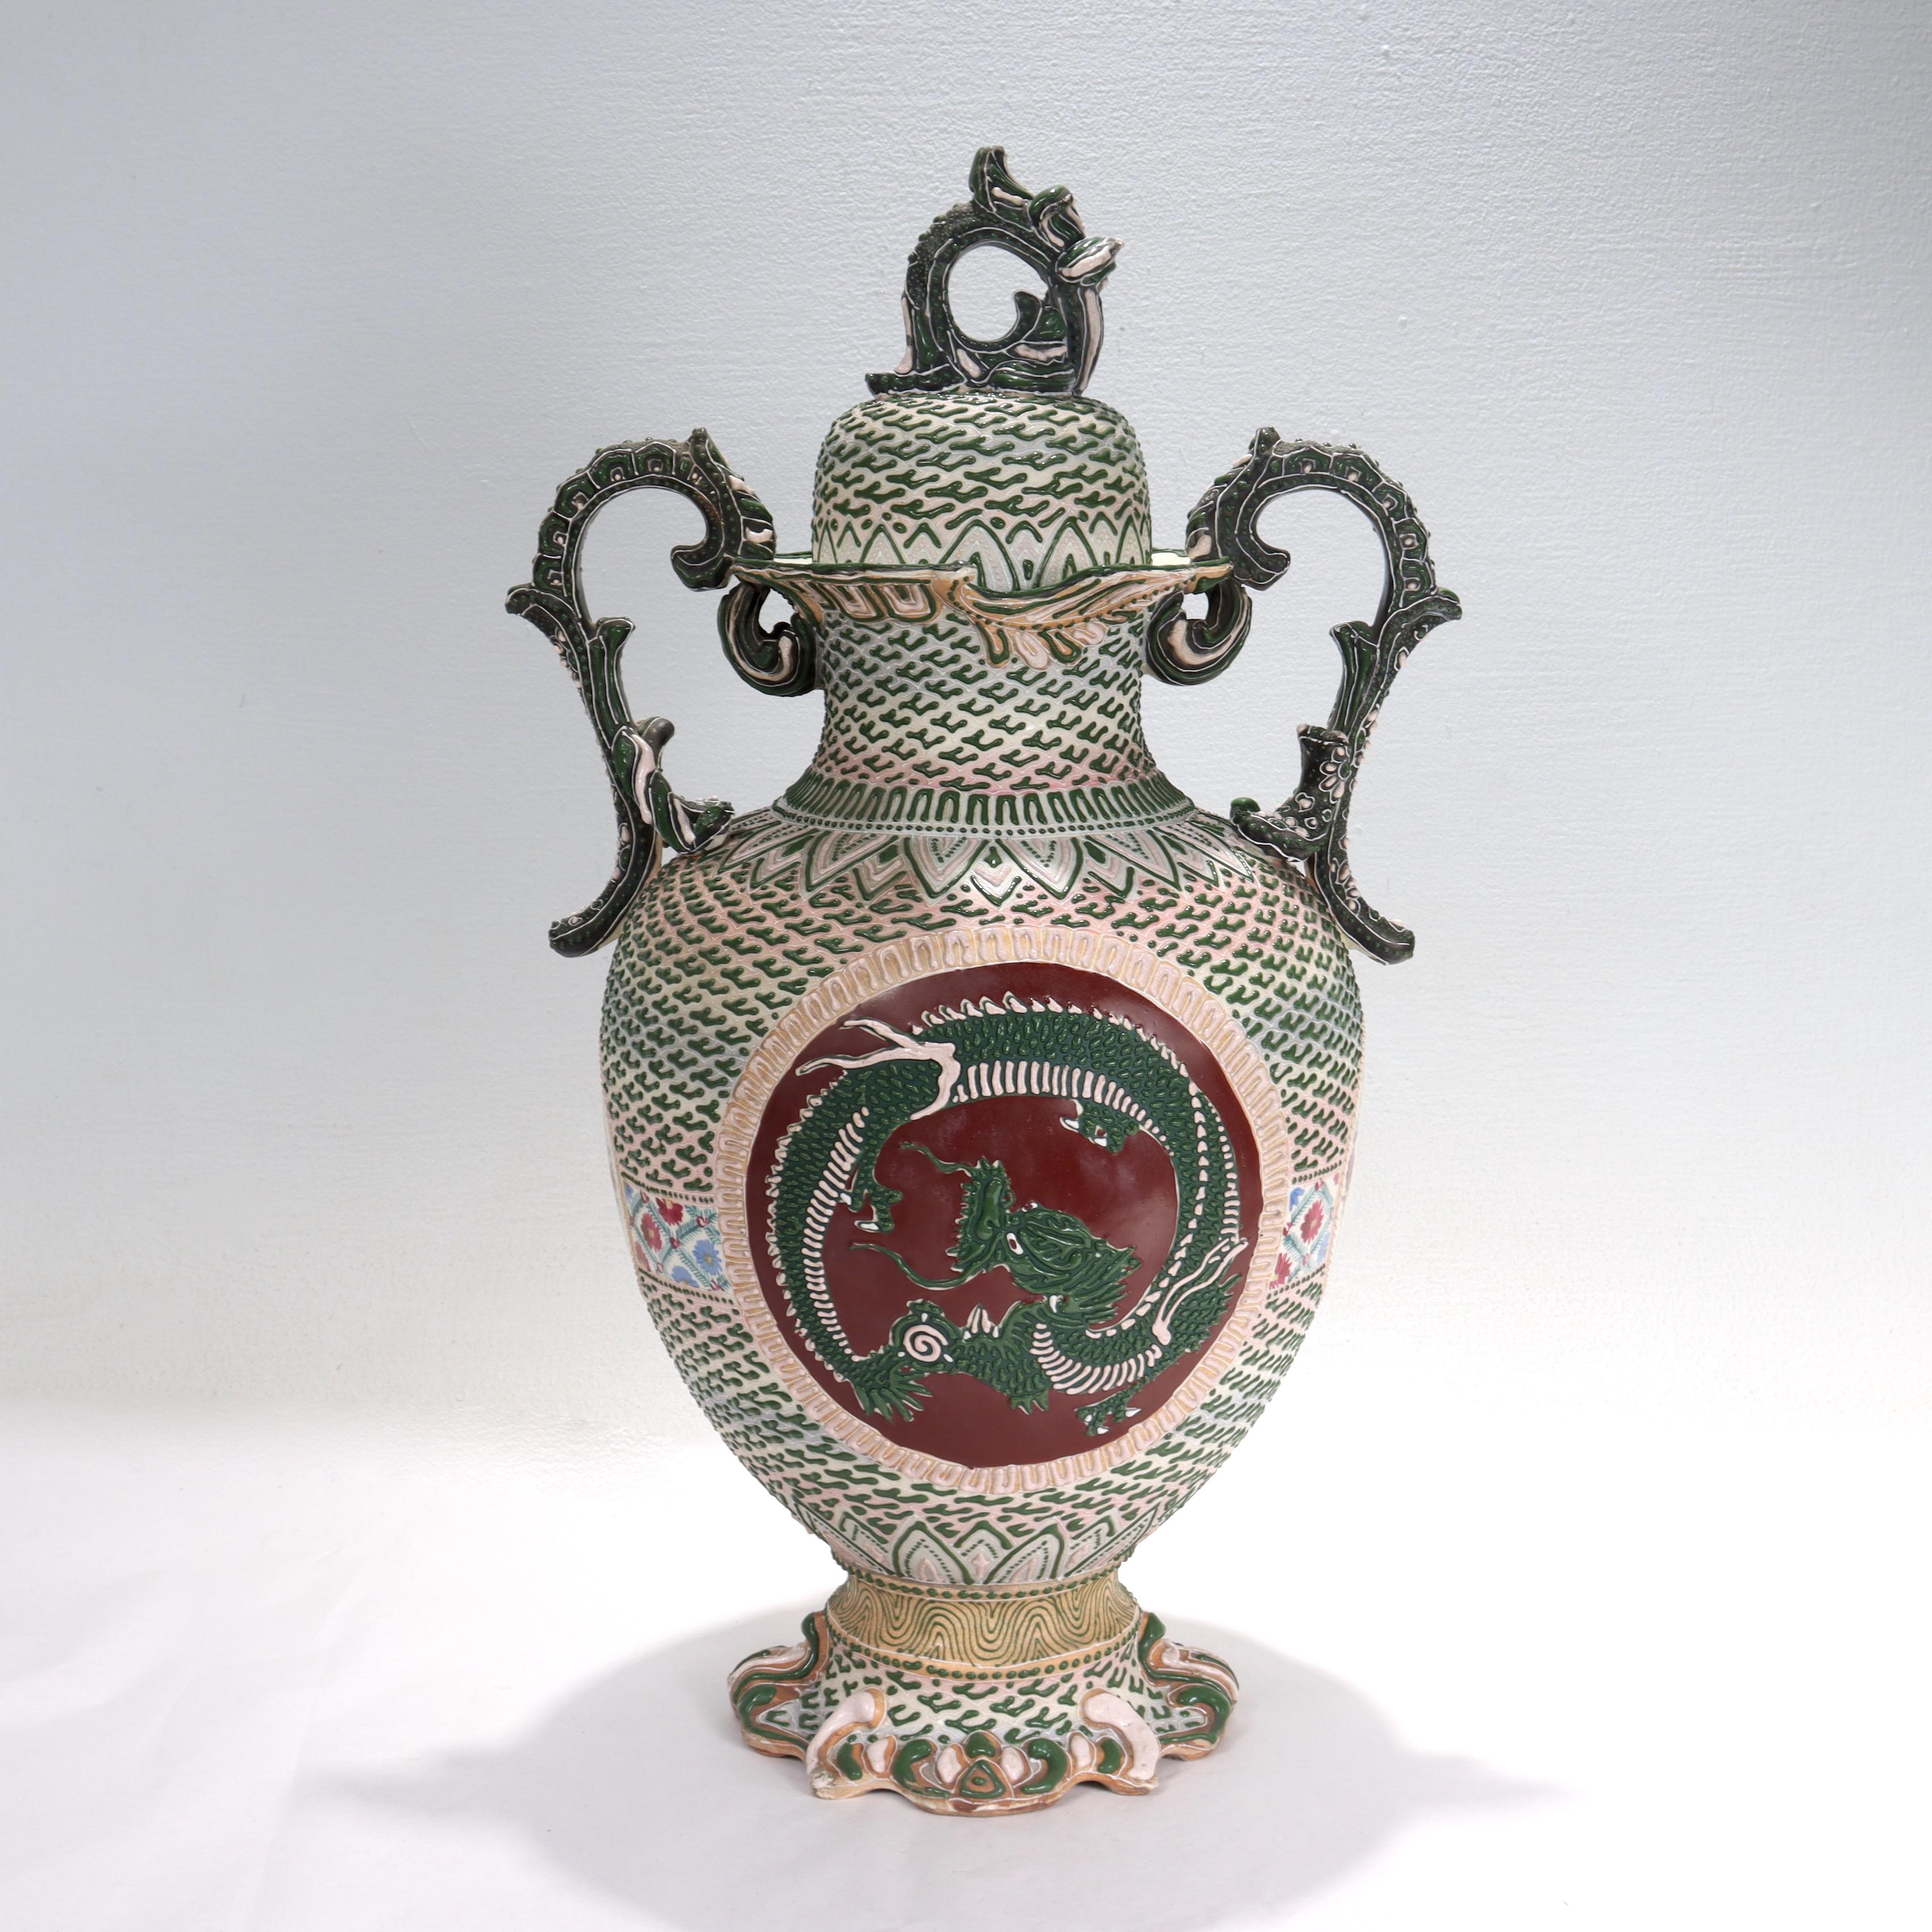 A fine antique Japanese Nippon porcelain vase or covered urn.

With green, pink, and white tones in raised moriage enamel that gives a three-dimensional effect. 

Decorated with 4 cartouches throughout. The main cartouche features a moriage dragon